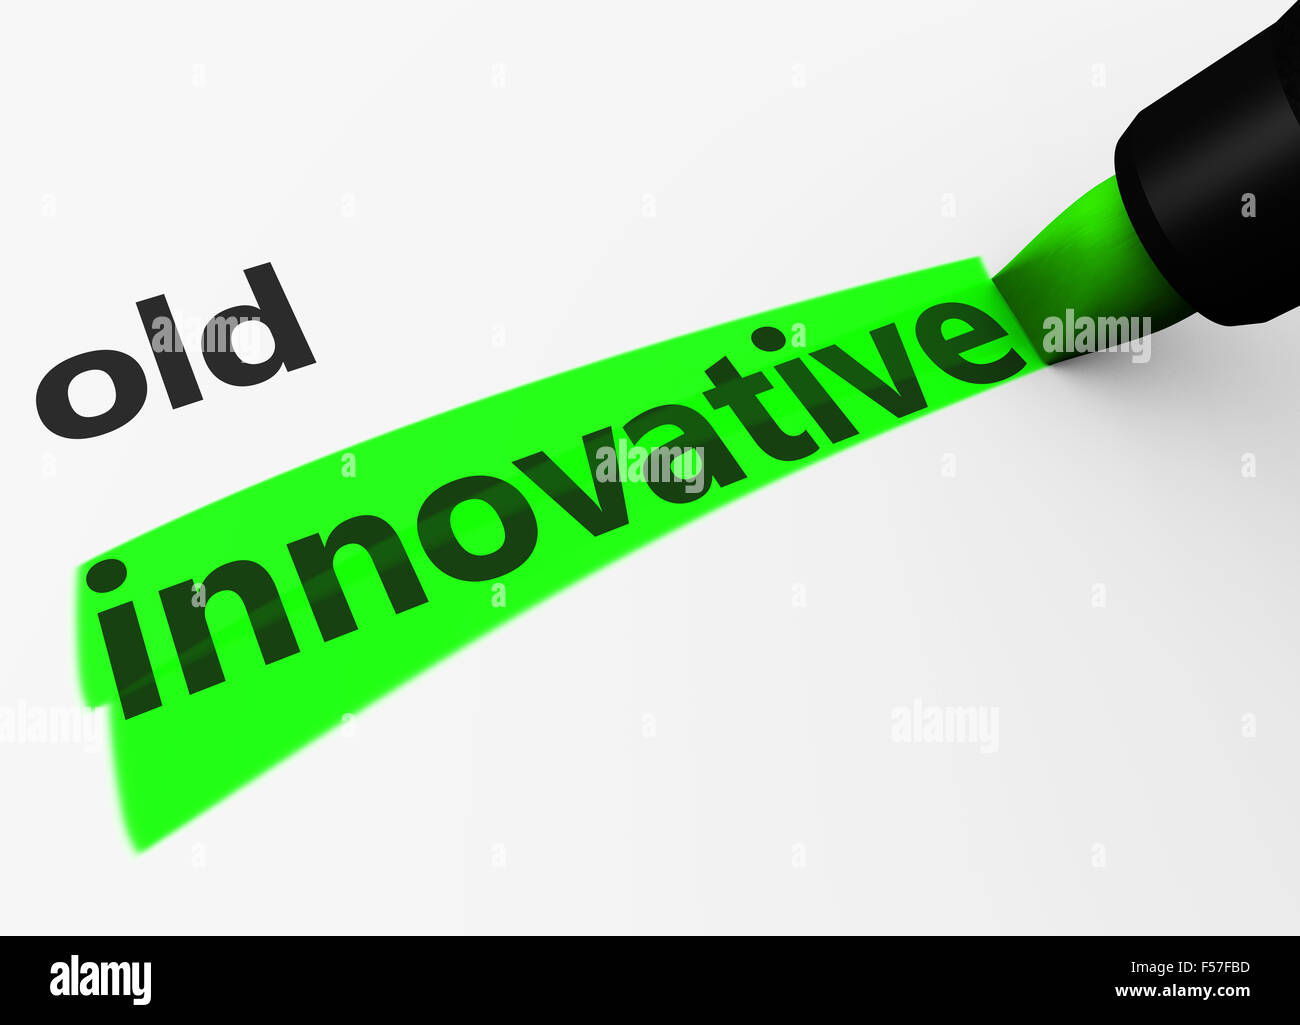 Innovation in business concept with a 3d render of old text and innovative word highlighted with a green marker. Stock Photo